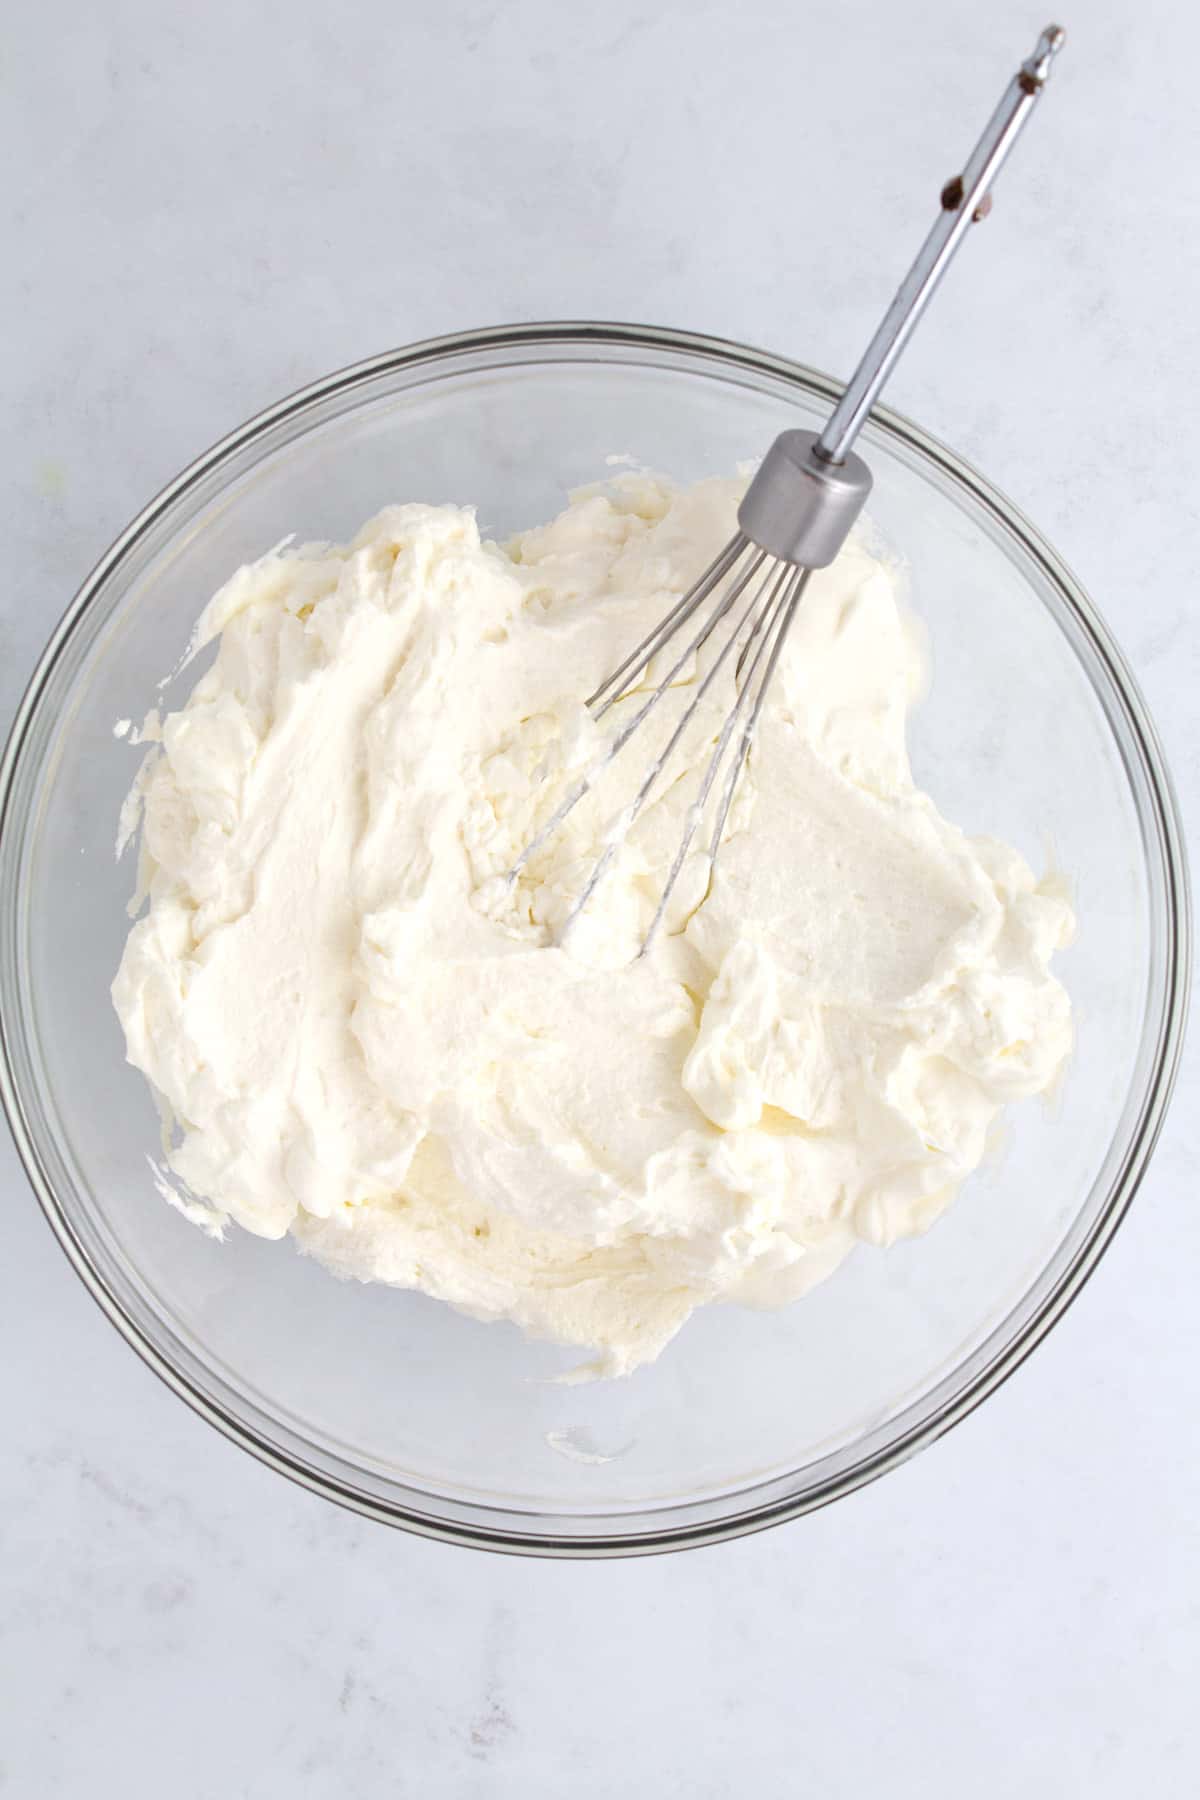 An overhead view of mascarpone whipped cream in a clear glass bowl with a whisk.